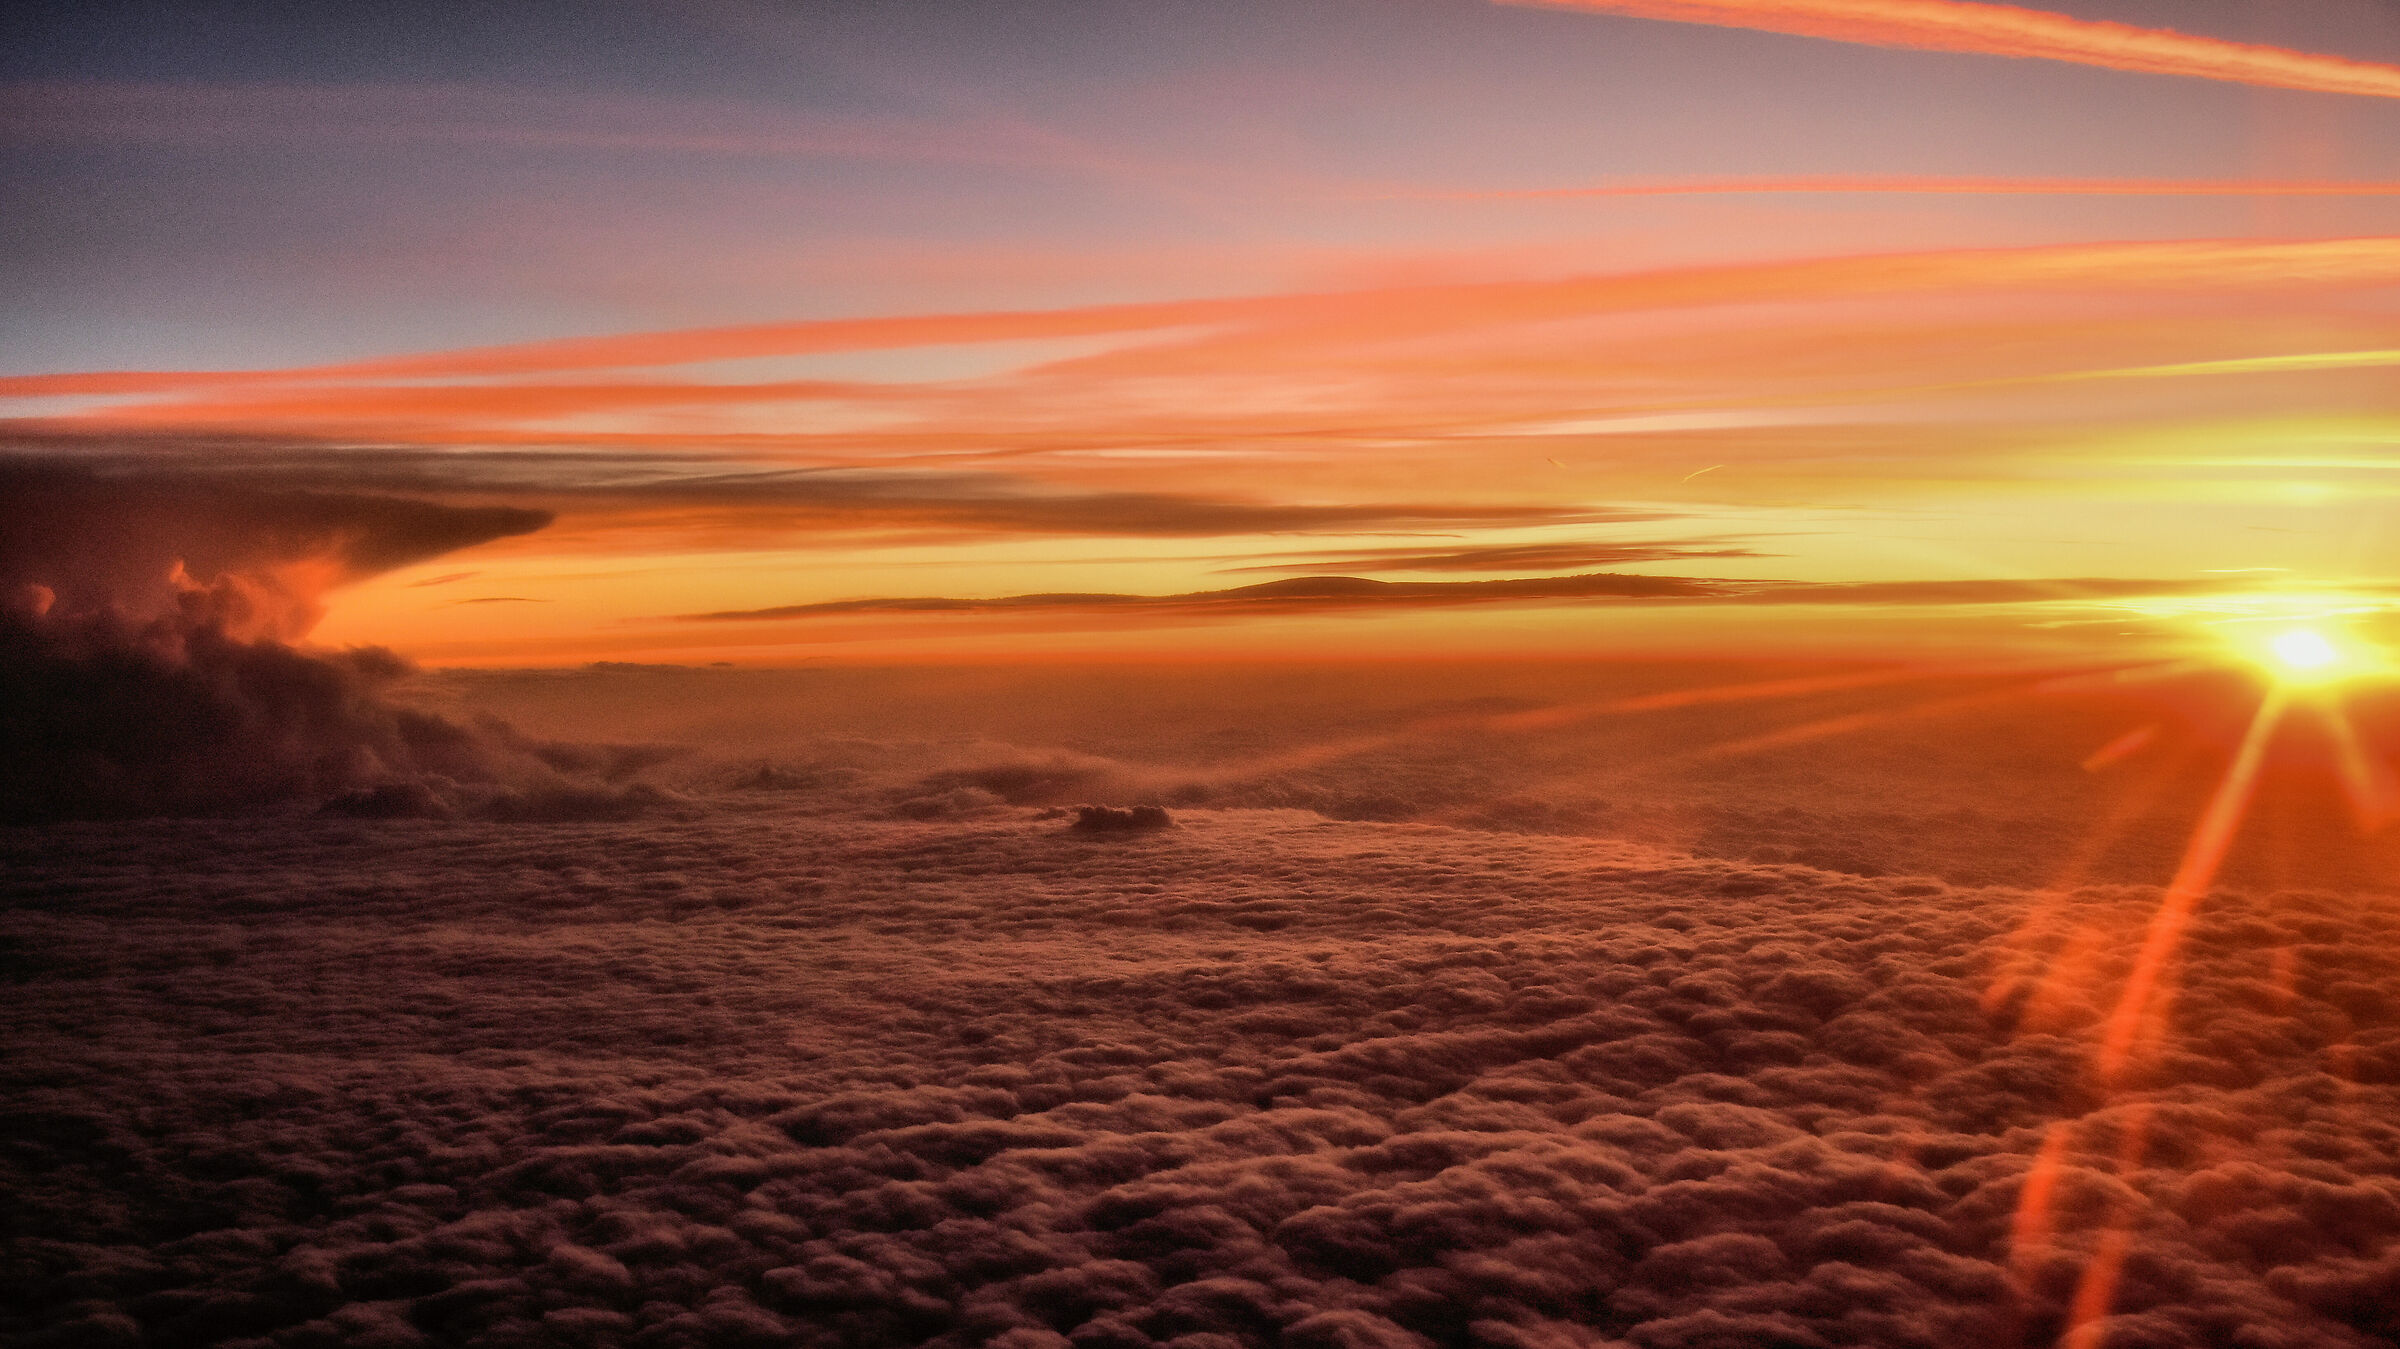 Sunrise over the clouds...